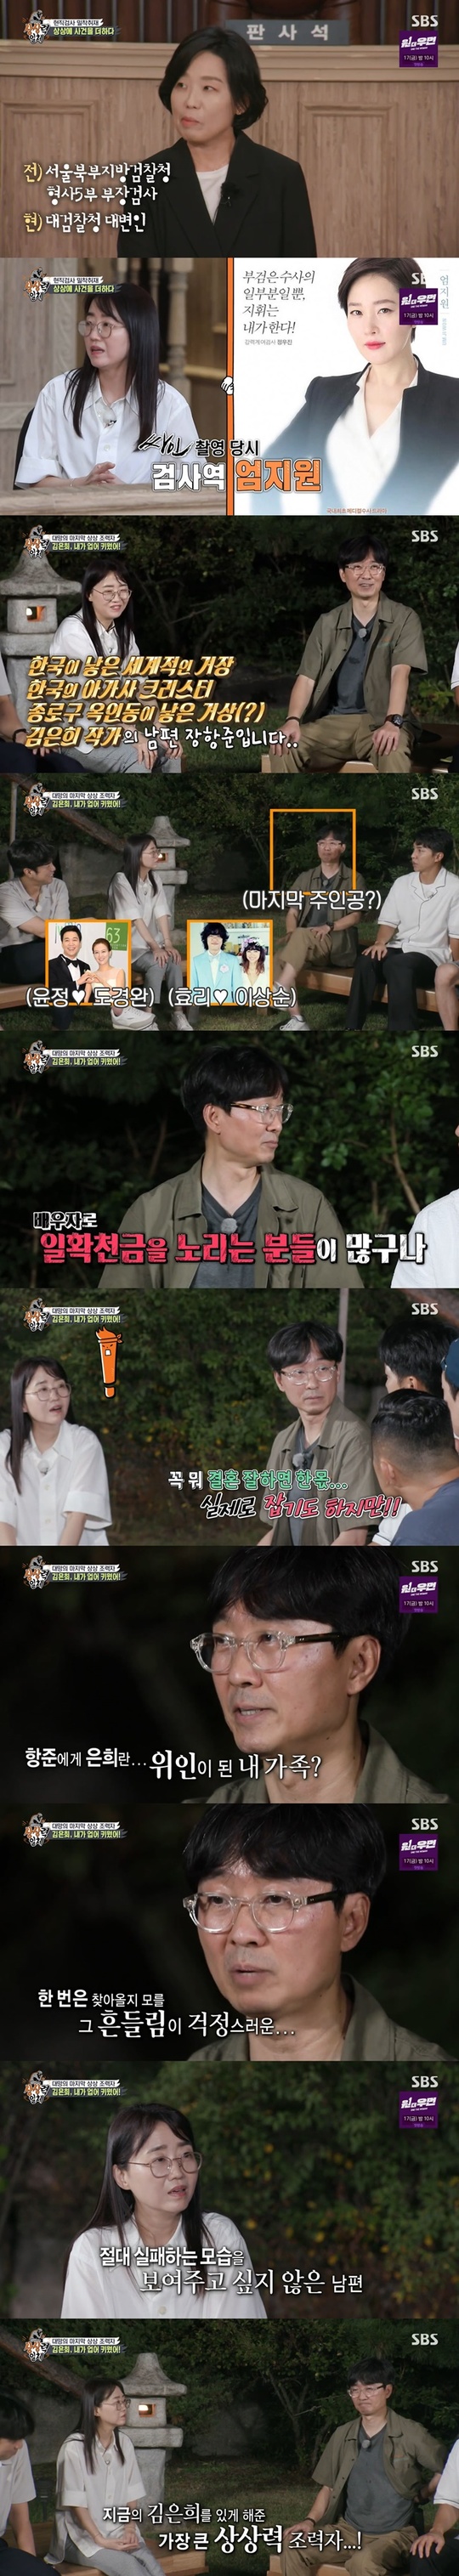 Jang Hang-jun reveals pride in wife Kim Eun-hee writerOn SBS All The Butlers broadcast on September 12, the disciples who became Kim Eun-hees Daily Writers Team were drawn.On this day, Master Kim Eun-hee and his daily disciples visited the second assistant prosecutors office spokesman Seo In-sun Inspection to get help with the fairy tales of genres.Kim Eun-hee introduced from the character setting of Uhm Ji-won, who played the role of Inspection in the drama Signs, to legal terms and practical procedures.Kim Eun-hee said, Seo In-sun Inspection ate too much of the Signs.At that time, Uhm Ji-wons character committed corruption and corruption until the middle of the play. Seo In-sun Inspection said, I was relieved to ask myself that I was set up at first and then I was going to the path of justice in the scenario. The forensic scientist is the main character, but he also asked me about terms, documents and procedures.I tried to improve the perfection. The second assistant, Husband and film director Jang Hang-jun, by Kim Eun-hee, appeared.Yang Se-hyeong made a guess to Jang Hang-jun, who appeared with a hat on, Do you think Ju Ji-hoon?Kim Eun-hee said, I look at Ju Ji-hoon somewhere.In particular, Kim Eun-hee wrote about Jang Hang-jun, It was my first shooter in life, I started working as an entertainer.Then my immediate senior was Jang Hang-jun. He taught me scenarios and society.In addition, Jang Hang-jun commented, I raised Kim Eun-hee writer. I have never talked about that.I am a world-class man, Kim Eun-hee said. But I am sick, he said. I think I talked about it.Jang Hang-jun also said, I think I contributed to some extent. Kim Eun-hee won the drama Signal in the white arts prize in 2016.At that time, I was tearful, saying, Thank you to director Jang Hang-jun, who made me stand here without knowing anything.Lee Seung-gi said, The three major thieves in Korea were originally Yeon Jung-hoon, Rain, and Soy sauce, but recently they are the three major marriage men, and Do Kyung-wan, Lee Sang-soon and Jang Hang-jun are considered.I heard a lot of such stories, and there are a lot of people who are looking for a fortune as an actor, said Jang Hang-jun. Everyone is professionally good.Its just that the seesaw is leaning to one side, as if its a good marriage, and its true, of course, but its not so far.In addition, Jang Hang-jun said of his wife Kim Eun-hee, Hes so good humanly, hes my great family, and Ive worked so hard so far.There are natural talents, but people who try like this are not common. Even if they do not succeed, they will have to rise to the rank of great people. I admire them.Even if I retire now, I will be a person who will remain in the history of Korean dramas. However, no matter how good I am, no one should ever do it.When I get older and run out of business, Im not going to be a bit more vulnerable to failure.I have never been very good, so I can do it again even if it is a little bit. Kim Eun-hee is afraid that it will be the first hit.Im afraid Ill be frustrated, she confessed.